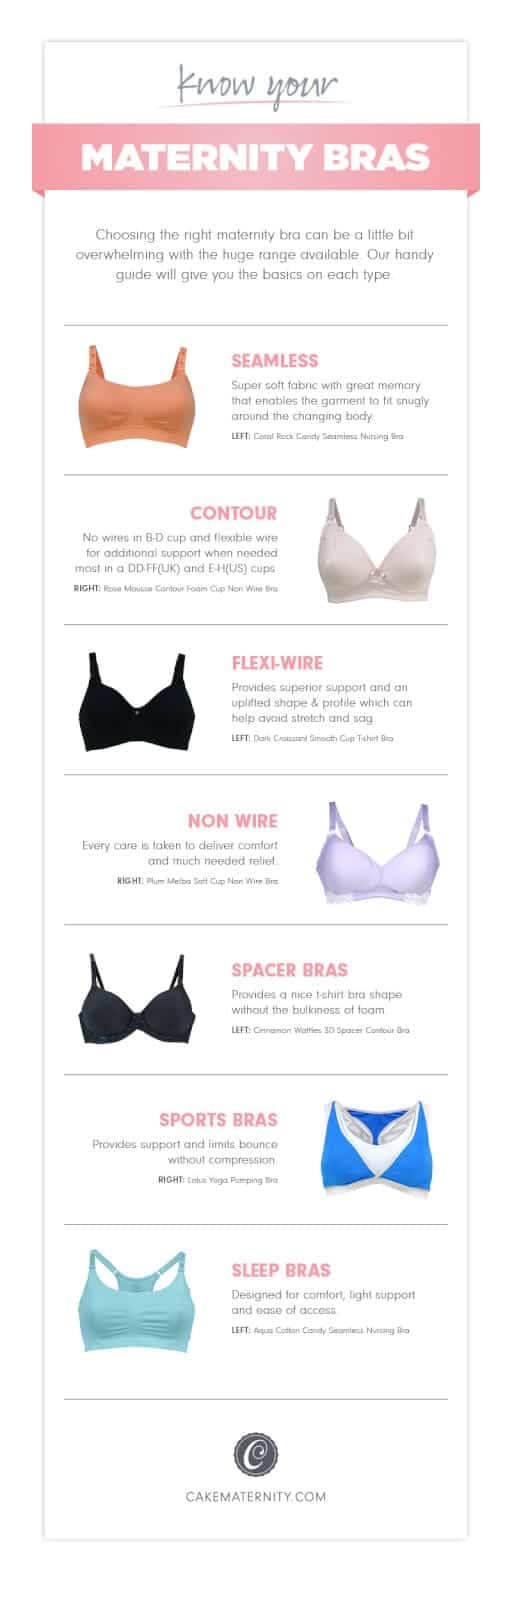 know-your-maternity-bras-infographic